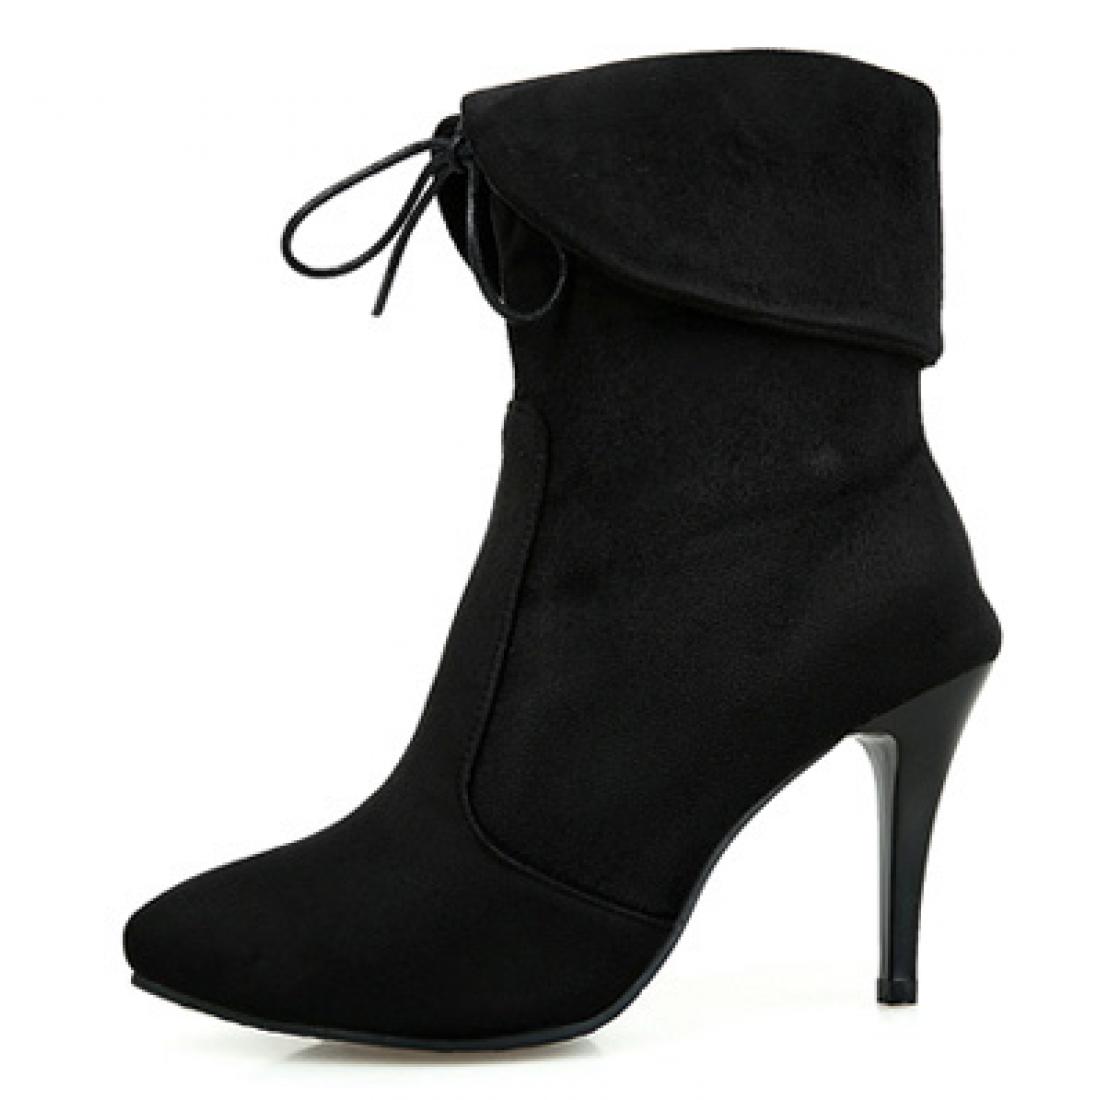 Black Suede Lace Up Ankle Flap High Stiletto Heels Boots ...